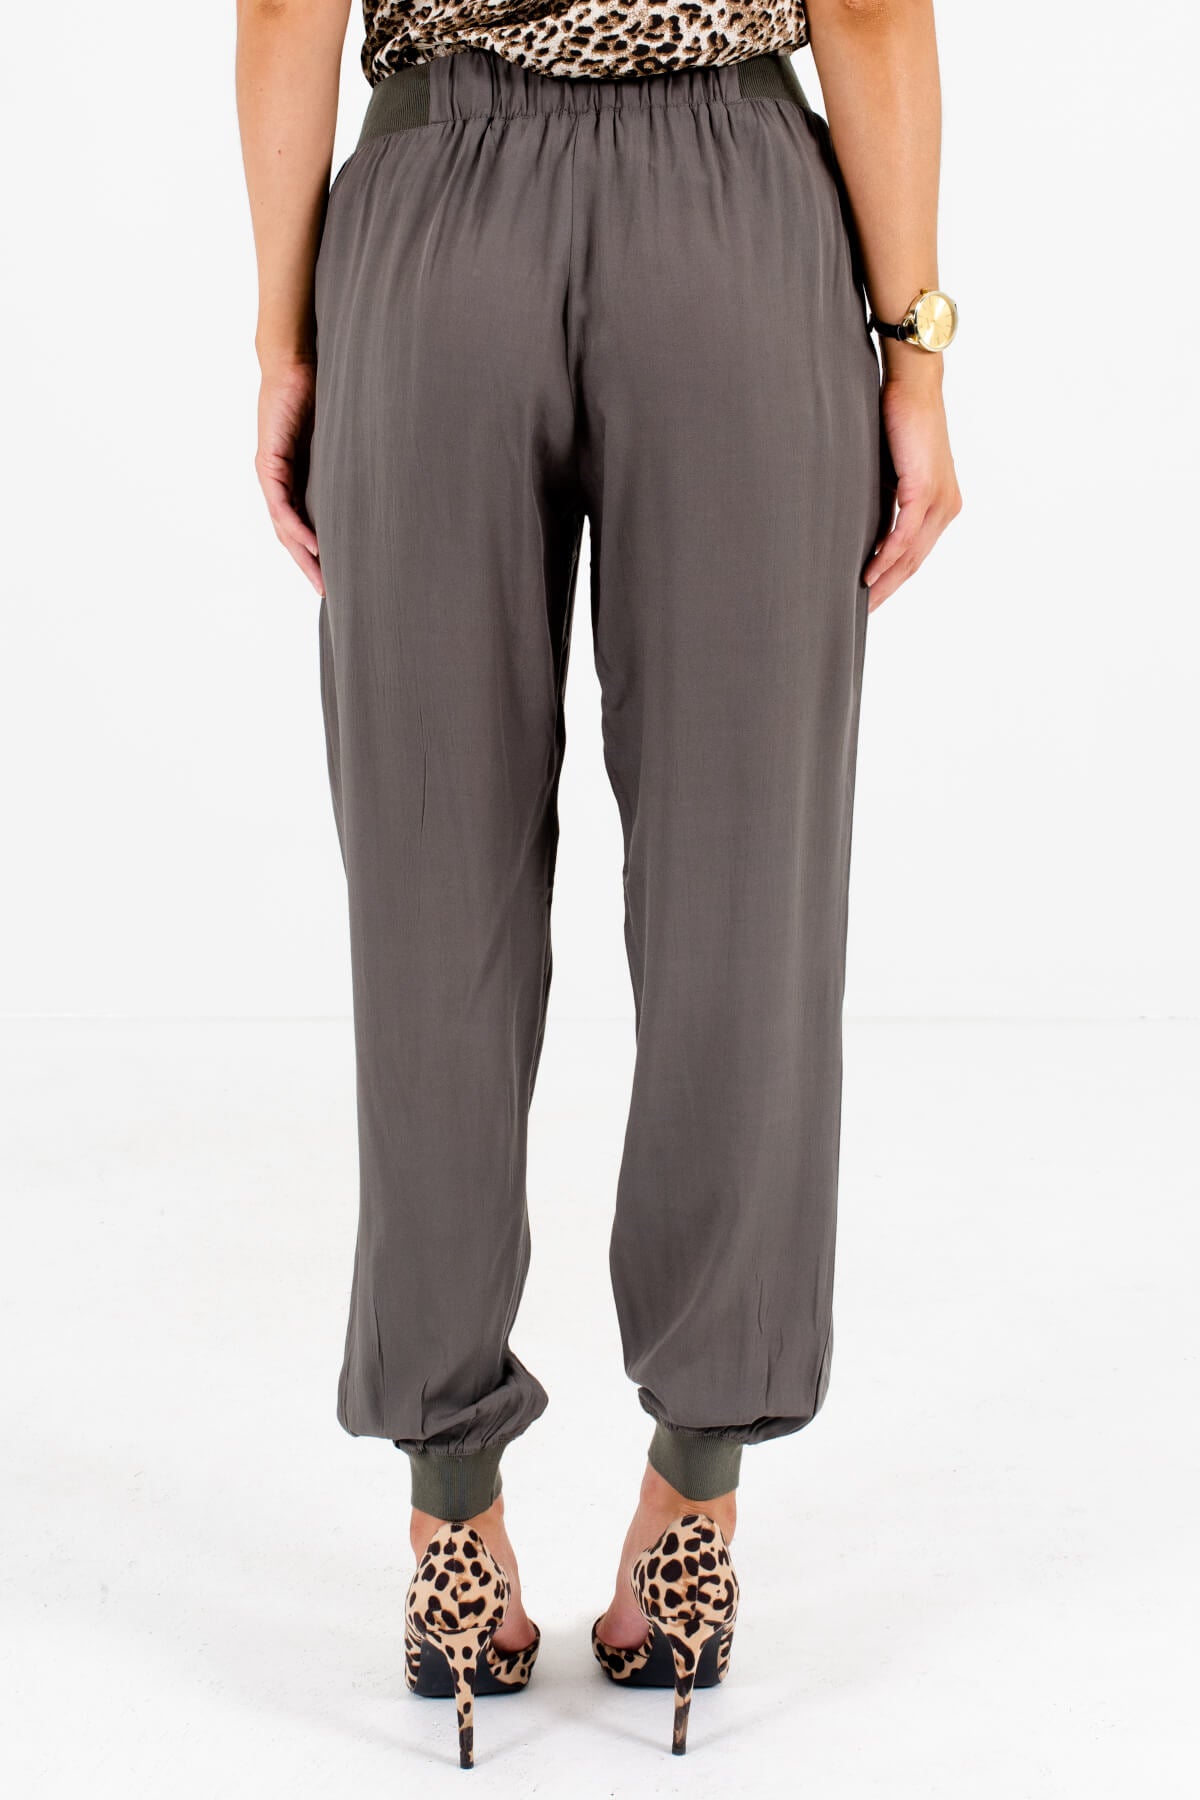 Women's Olive Green Boutique Pants with Pockets